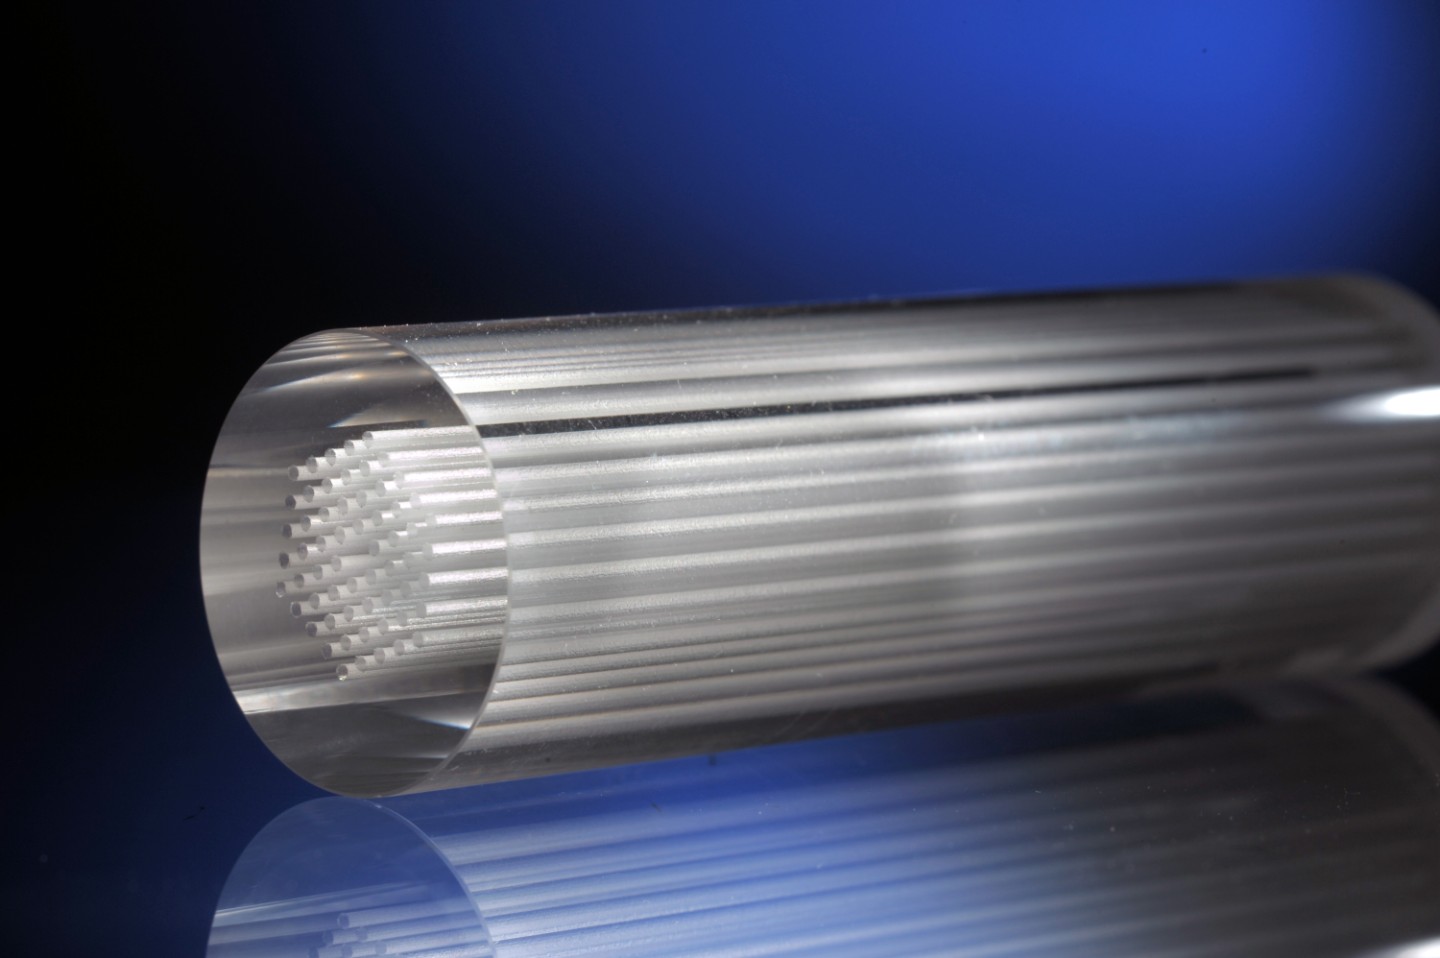 In the LAR3S project, two institutes from the Fraunhofer-Gesellschaft and one from the Max-Planck-Gesellschaft are working together on processes for manufacturing preforms for hollow-structure fibers with new geometrical shapes.